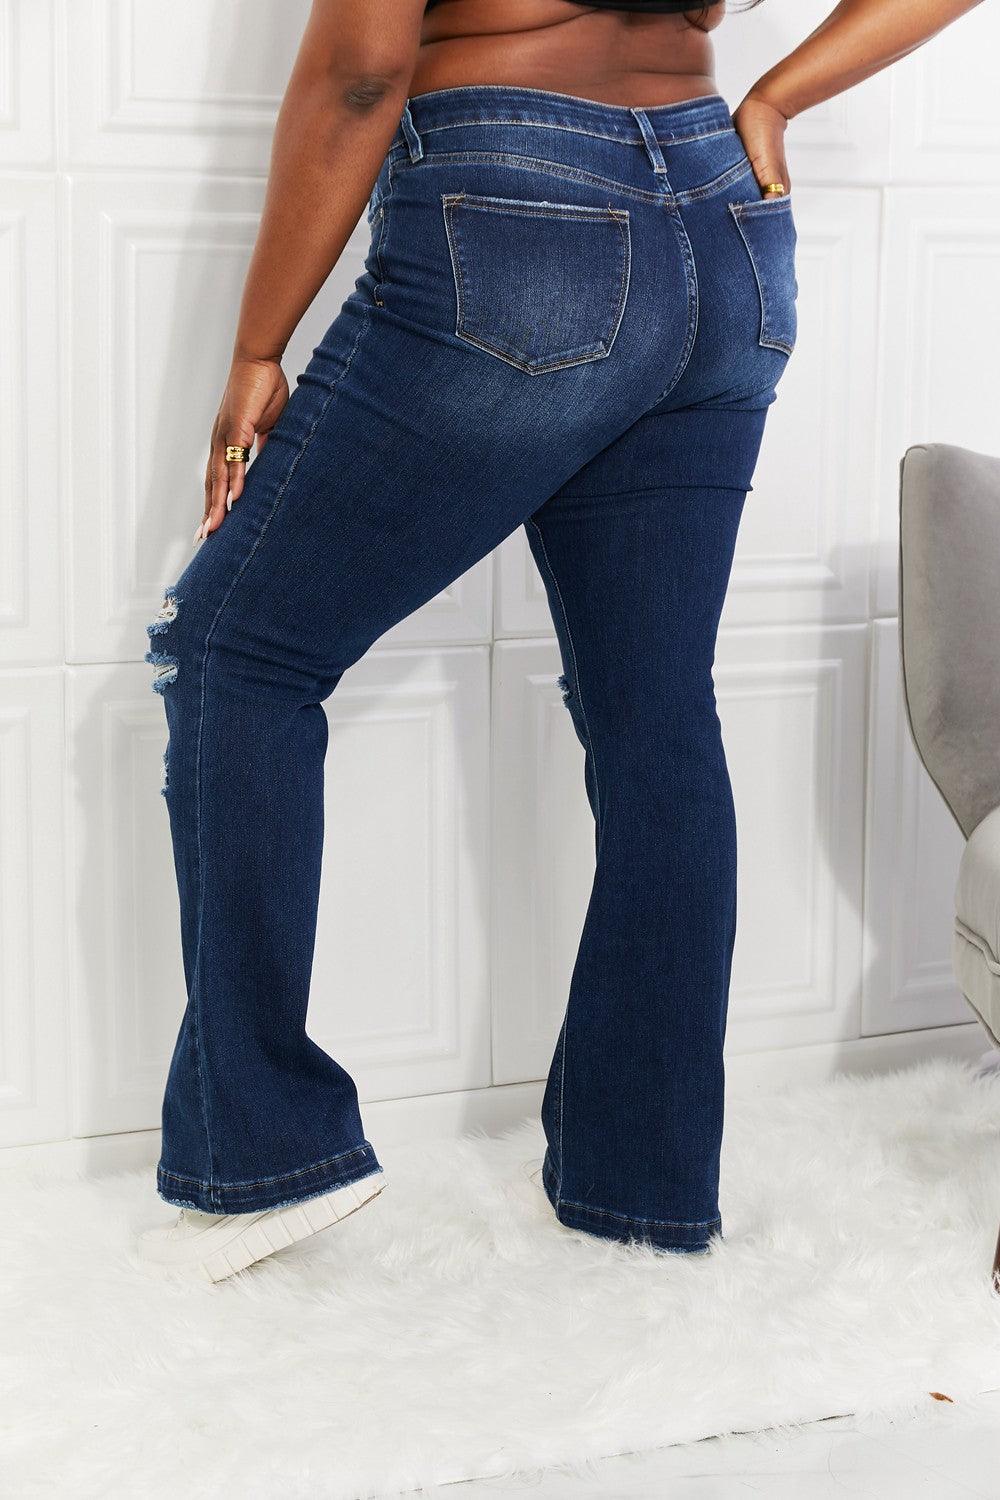 Kancan Full Size Reese Midrise Button Fly Flare Jeans - God's Girl Gifts And Apparel